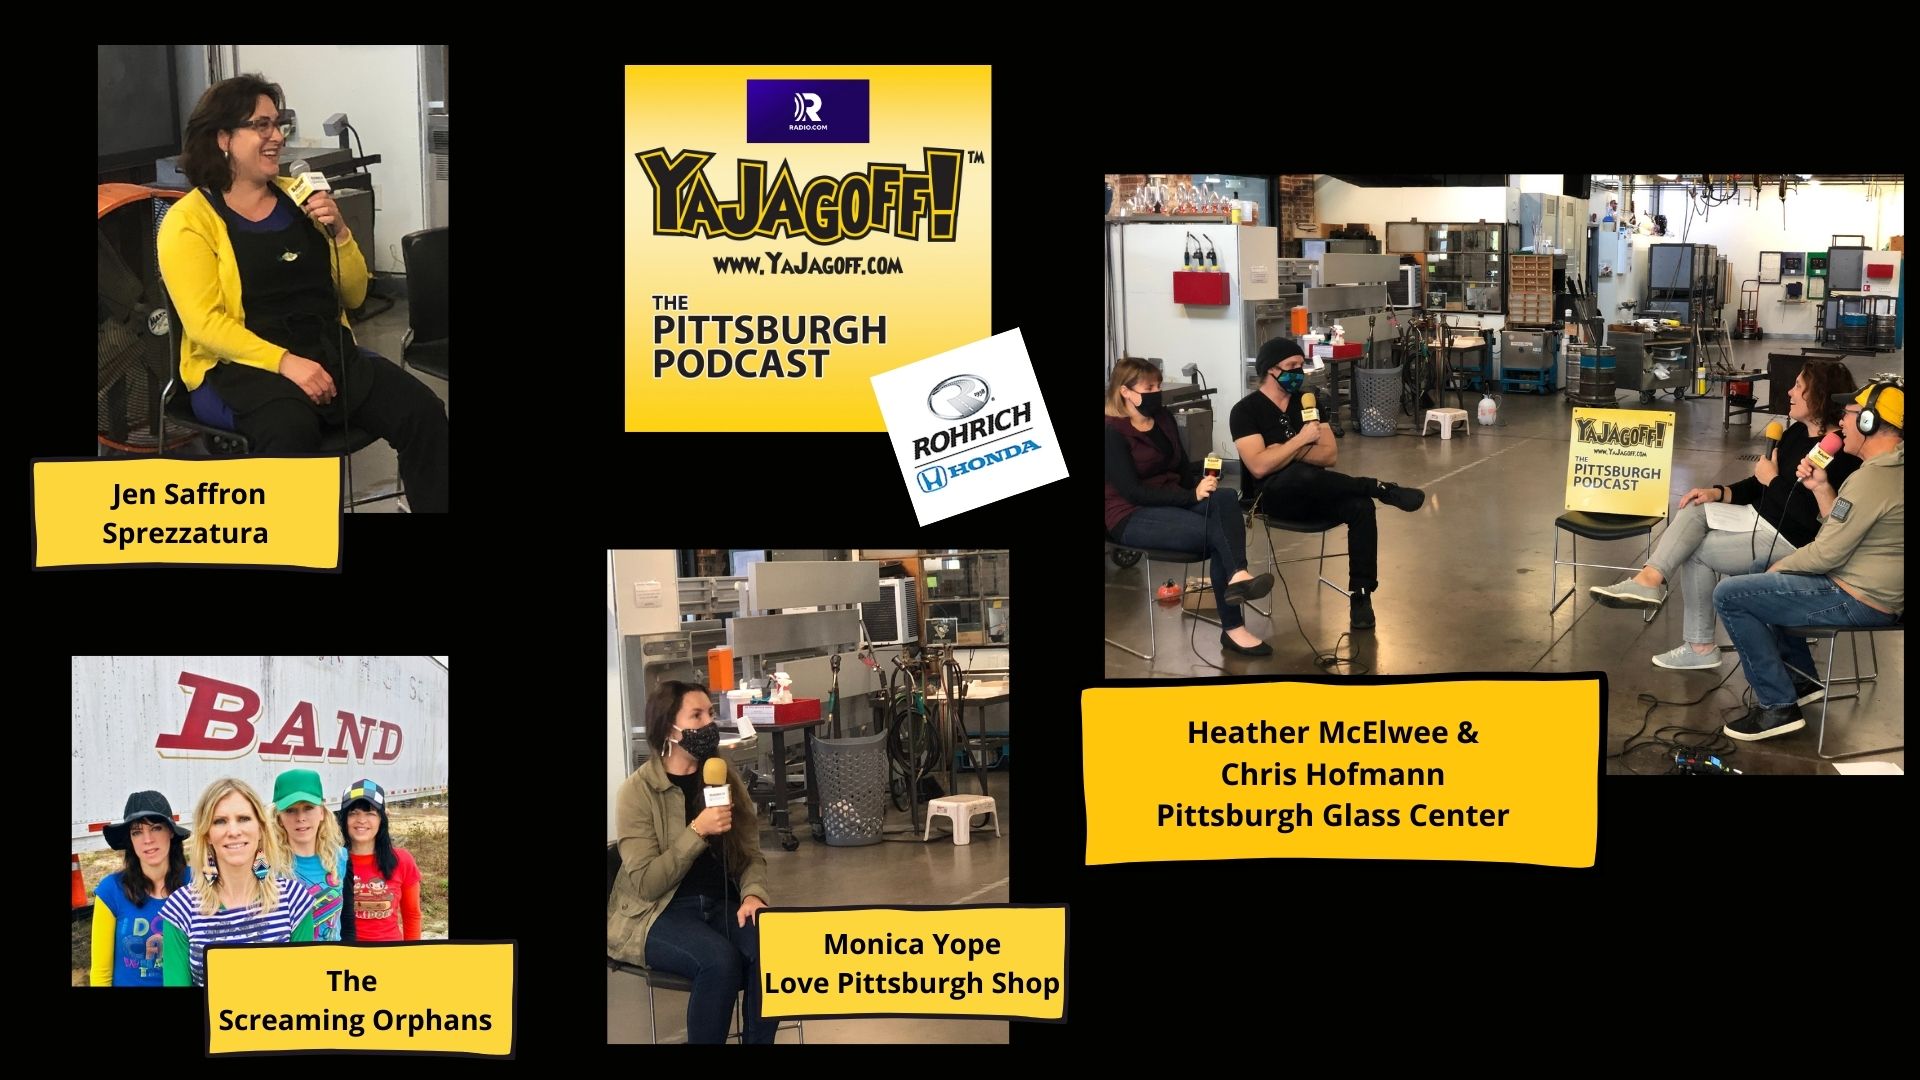 The YaJagoff Podcast at Pittsburgh Glass Center